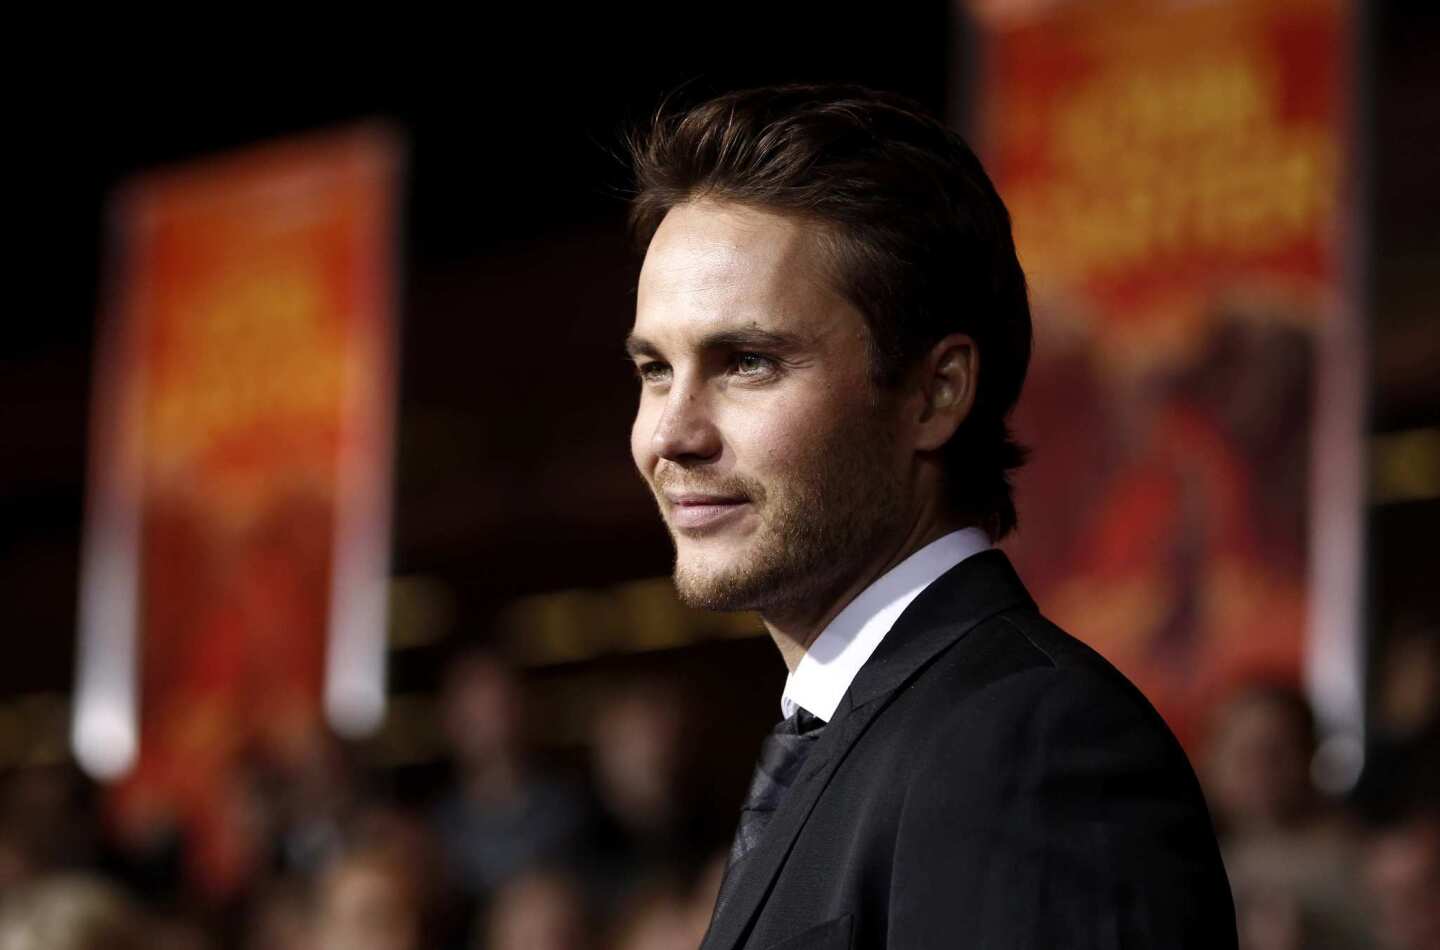 Taylor Kitsch, who plays the titular character in Disney's "John Carter," arrives at the film's premiere on Feb. 22 at L.A. Live in Los Angeles. In the film, Kitsch plays a Civil War veteran who leaps through time and is transplanted on Mars, where he finds himself imprisoned by giant barbarians. The story is based on the adventure hero created 100 years ago by writer Edgar Rice Burroughs, who wrote 11 novels about John Carter's battles and discoveries on Mars. The novels have inspired many fantasy filmmakers including George Lucas, James Cameron and "John Carter" director Andrew Stanton.